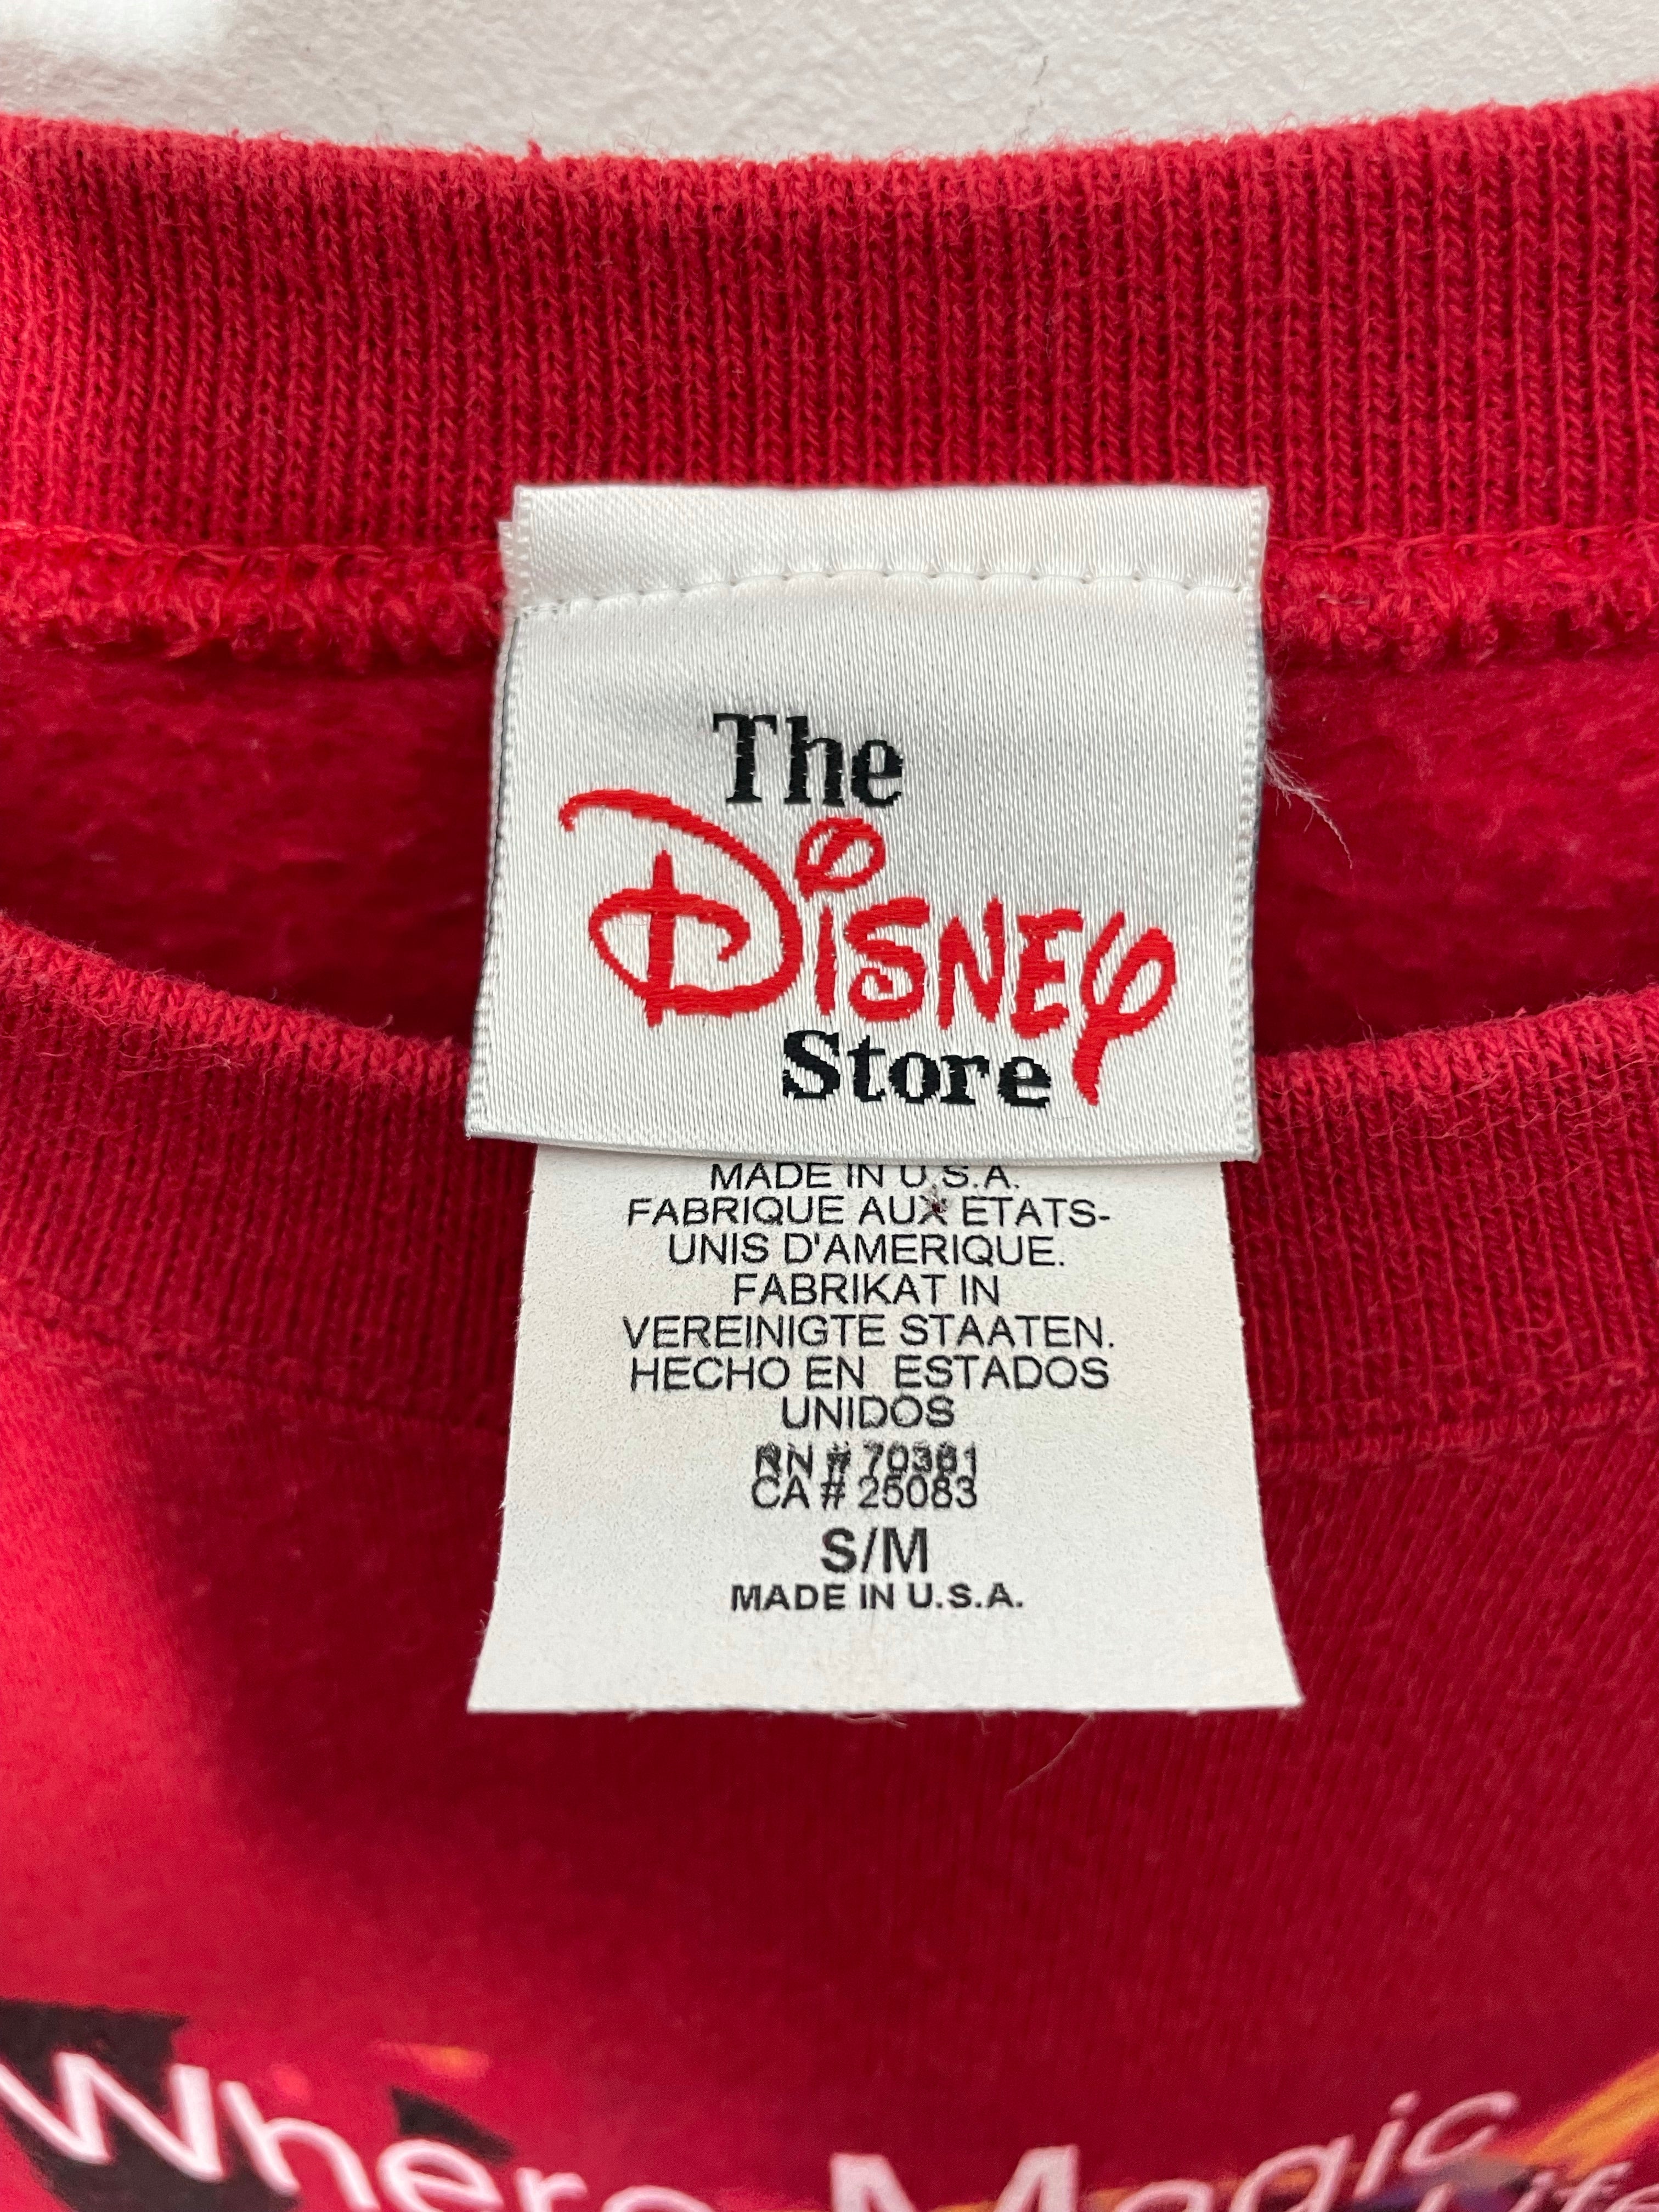 Mickey Mouse Where the Magic Comes to Life Sweatshirt - Disney Store - S/M